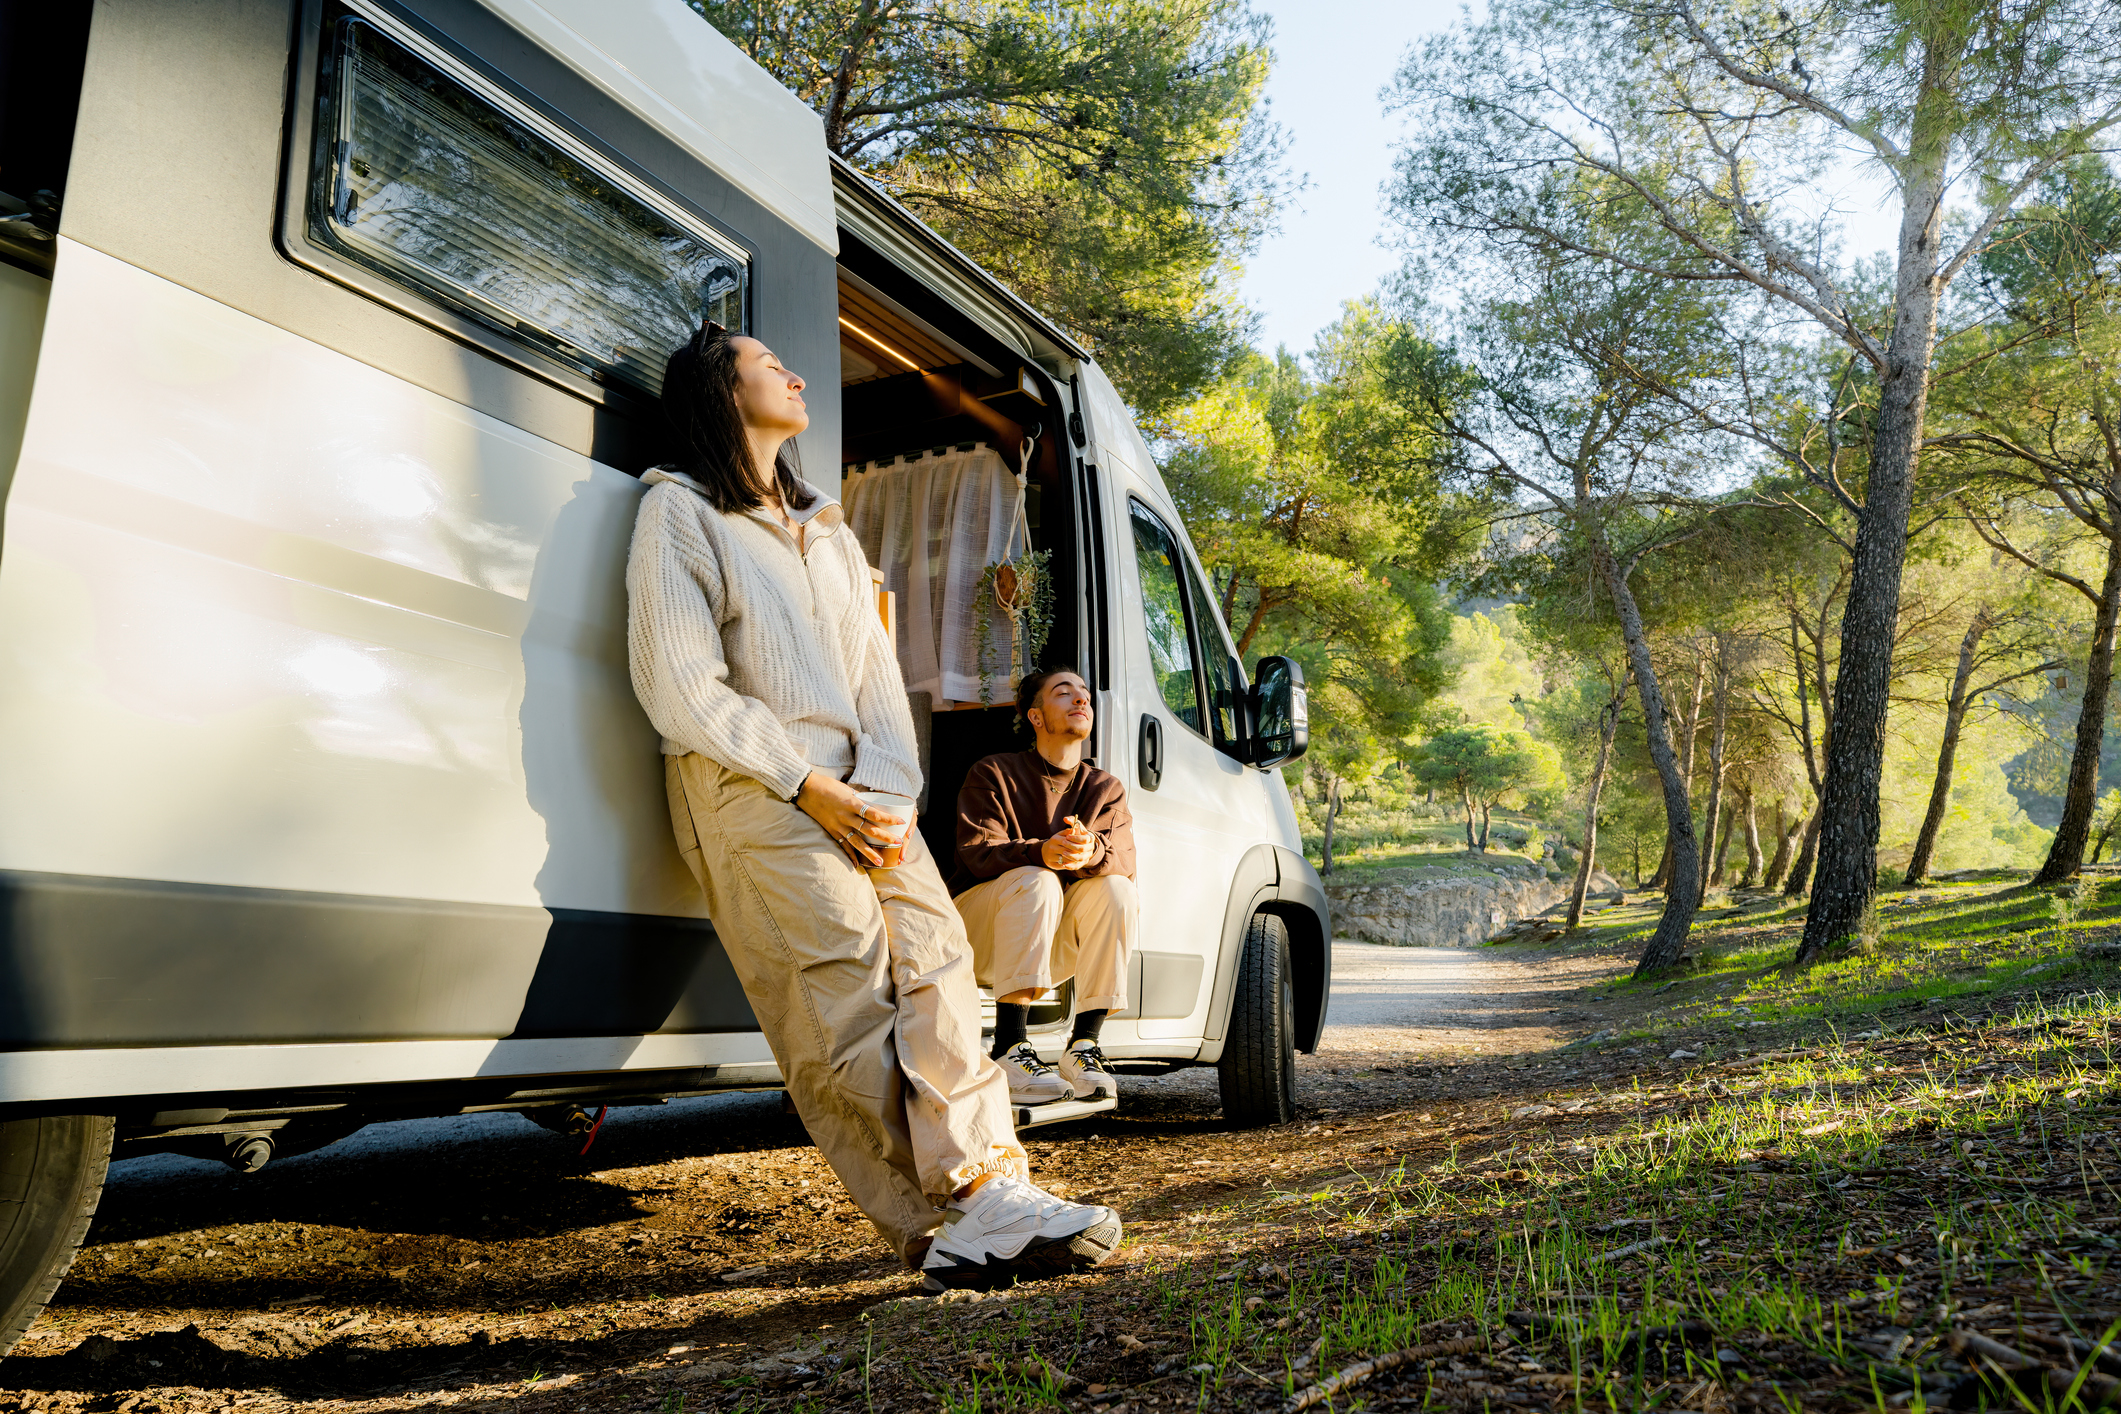 <p>The popularity of RVing has exploded in the past few years as people have sought a better way to vacation. But is RVing really that grand? Well, as a full-timer myself, I think so. However, the dream is far from reality, and many new RVers are shocked when the glamour fades. Here’s what it’s really like to vacation in an RV. </p> <p><b>Related:</b> Little-Known Facts About RVs</p><p><i>Editor's Note: This story was updated in April 2024.</i></p>